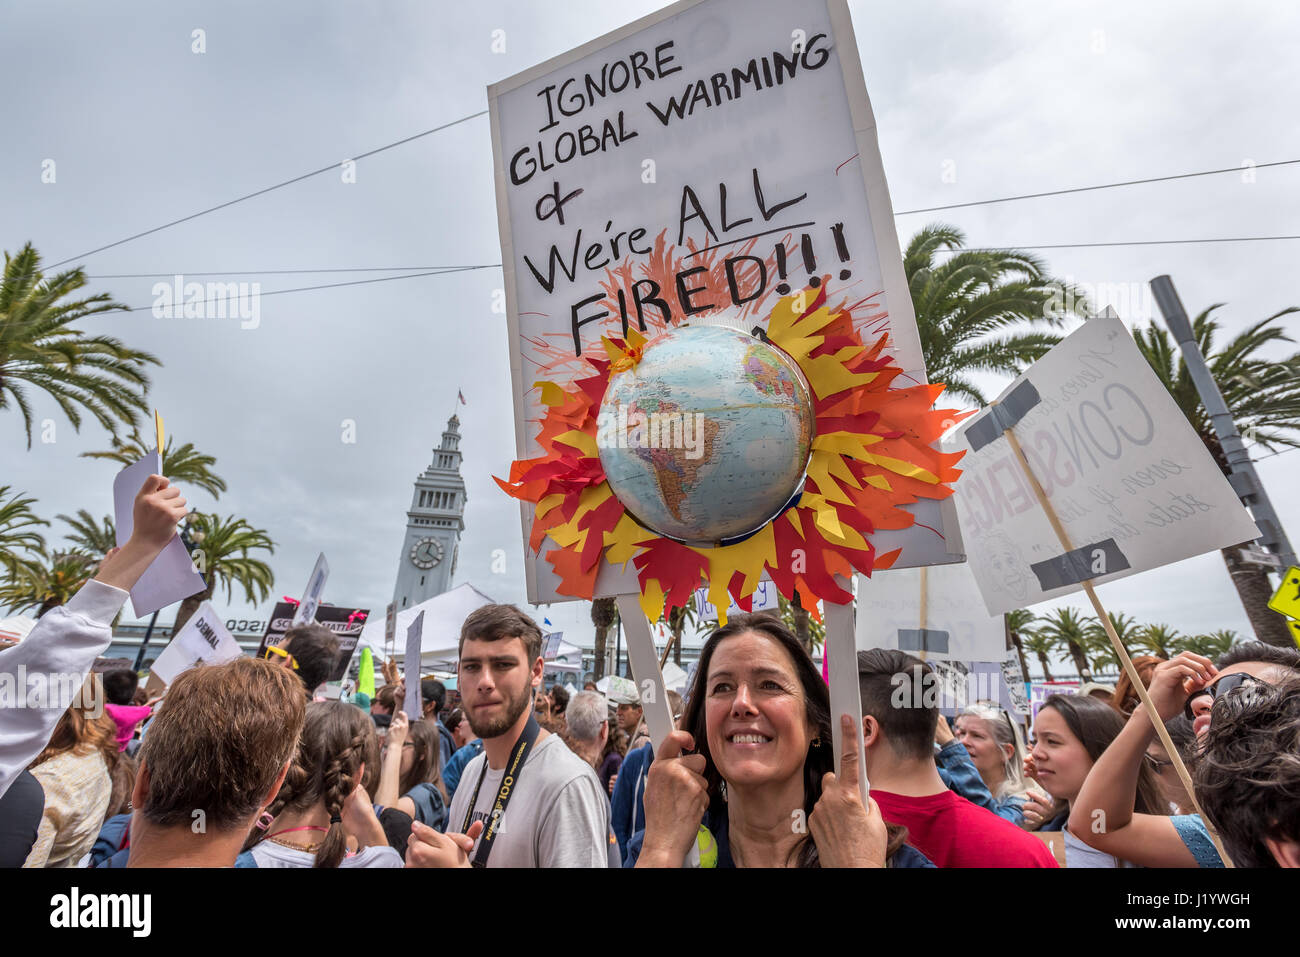 San Francisco, California, USA. 22nd April, 2017. "Ignore global warming and we're all fired!!!" reads a sign with a globe protruding in 3-D and paper flames held during the rally at Justin Herman Plaza before the San Francisco March for Science on April 22, 2017. Thousands gathered for the event  to show for support for science in the U.S. while also protesting Trump's major cuts to the Environmental Protection Agency, the National Institutes of Health and other science-related programs. A science fair was held in Civic Center Plaza after the march. Credit: Shelly Rivoli/Alamy Live News Stock Photo